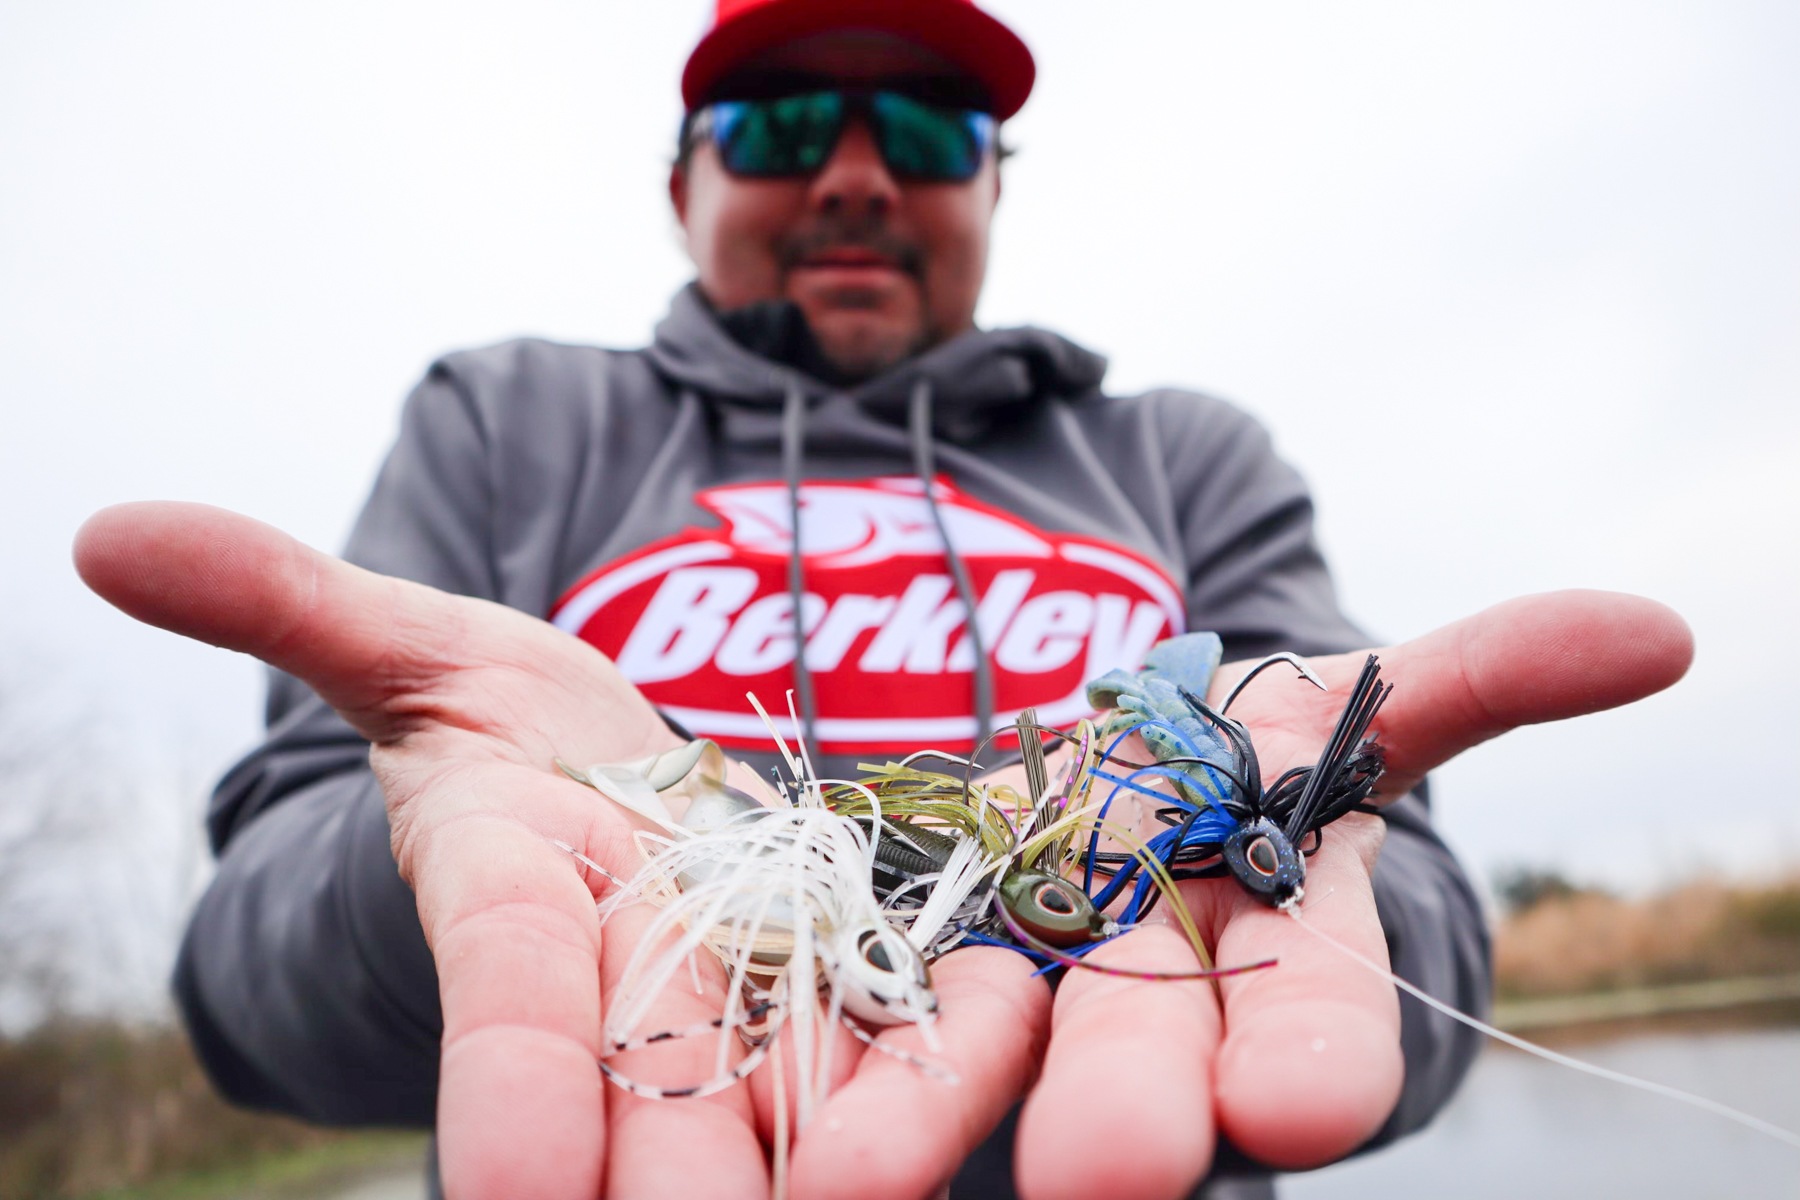 Jig Fishing for beginners HOW TO rig using the Berkley Power Swimmer Soft 